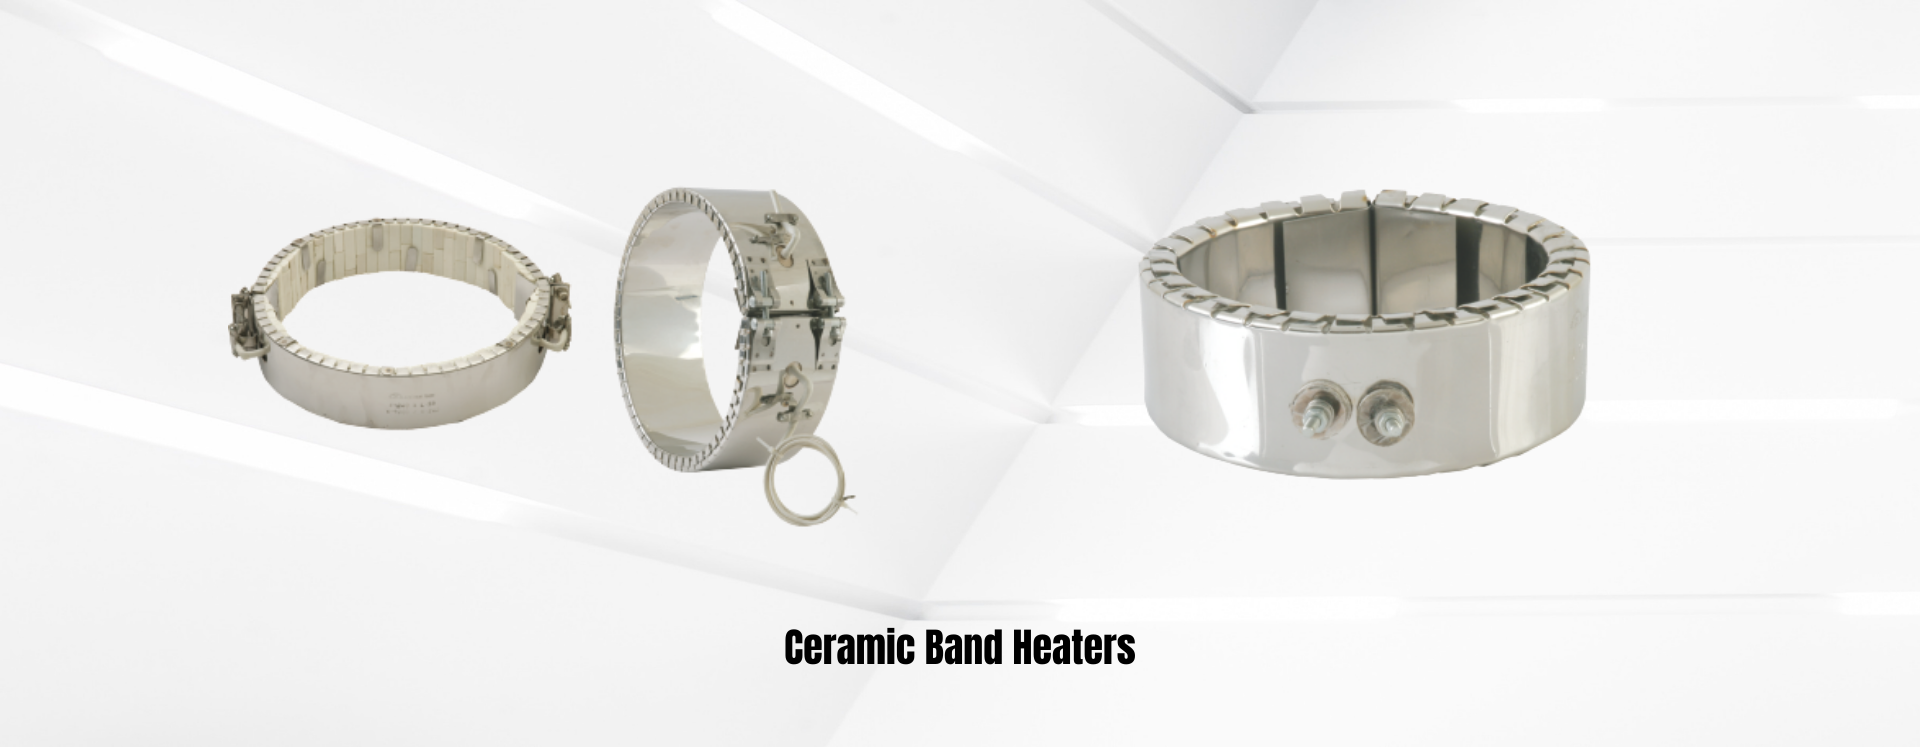 Ceramic Band Heaters - Manufacturer of Heaters